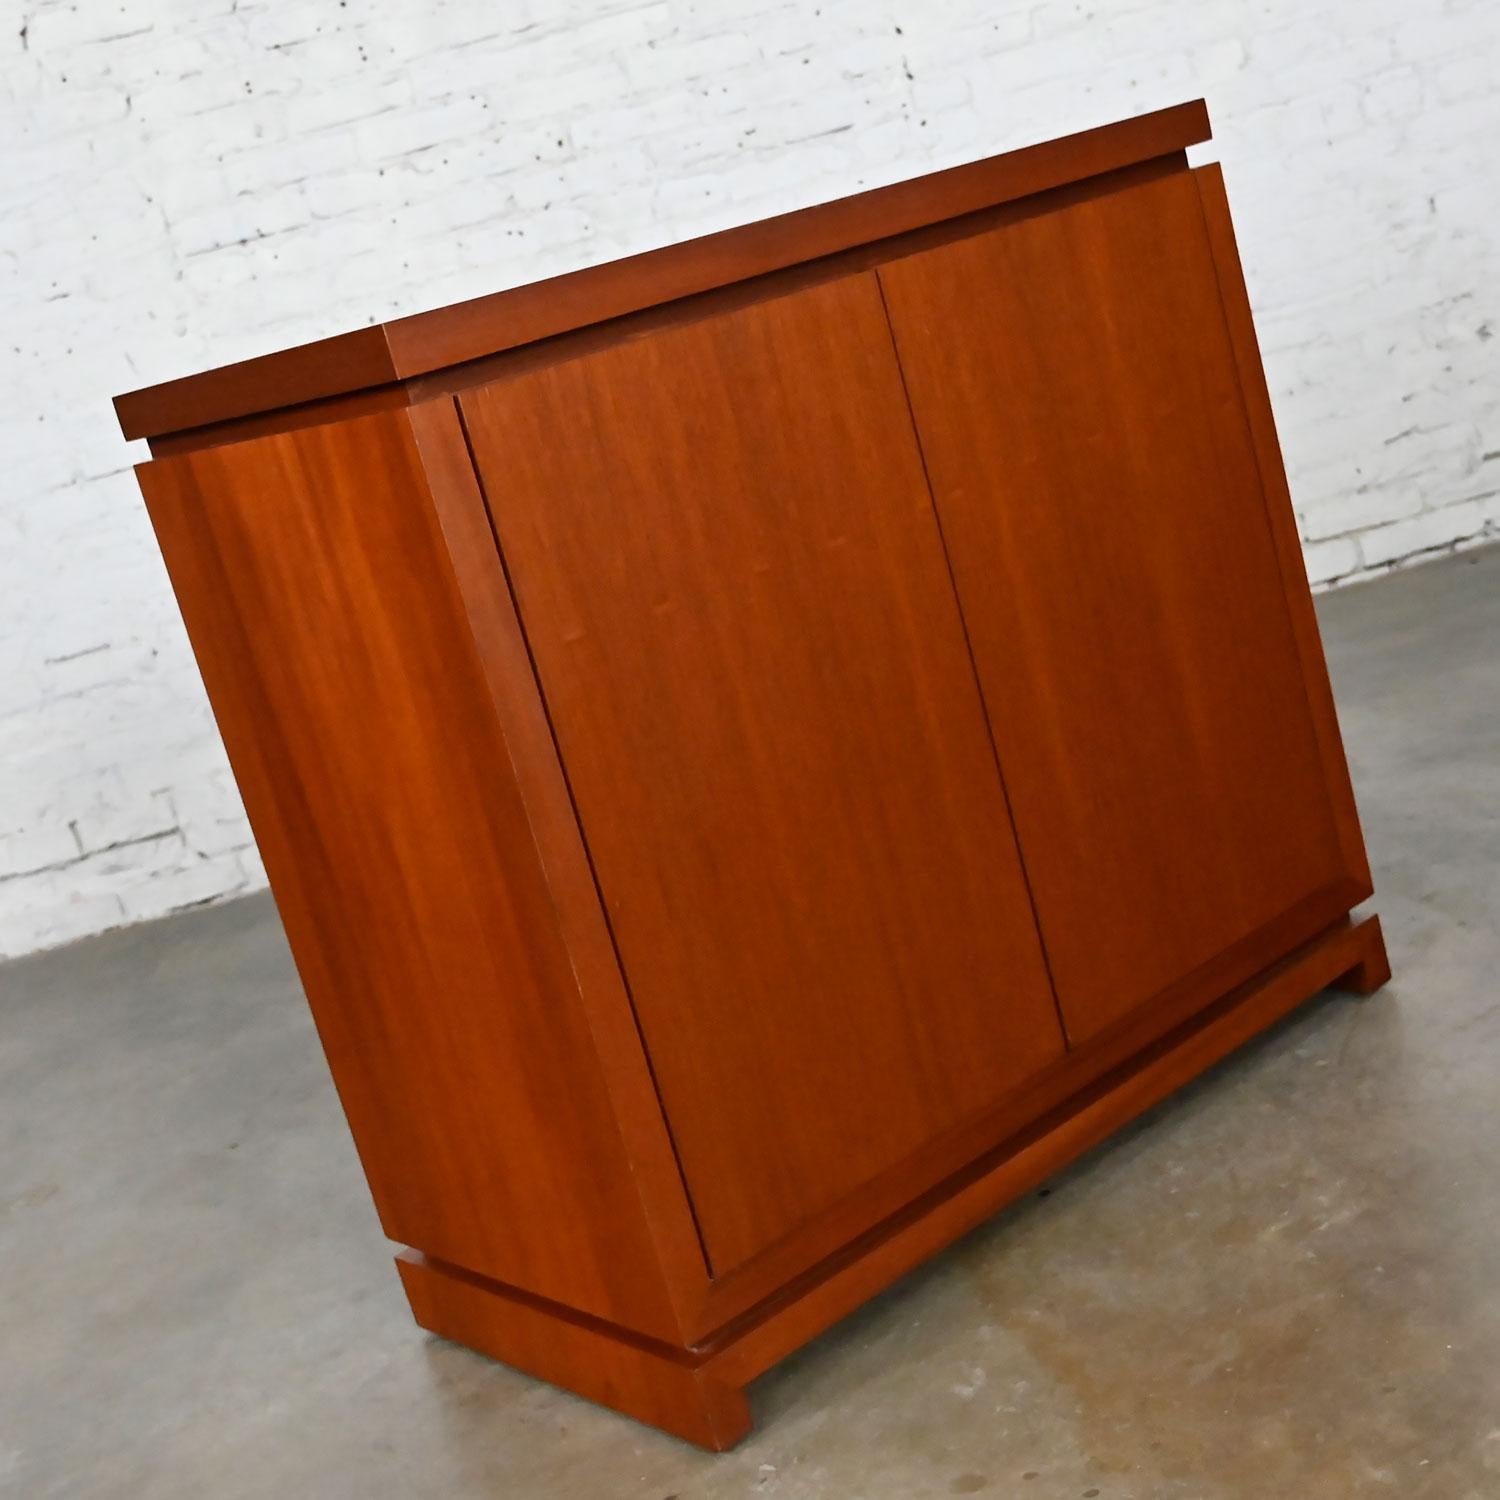 Lovely vintage Mid-Century Modern to modern narrow walnut console cabinet with rosewood colored stain, double doors, and an adjustable interior shelf. Beautiful condition, keeping in mind that this is vintage and not new so will have signs of use